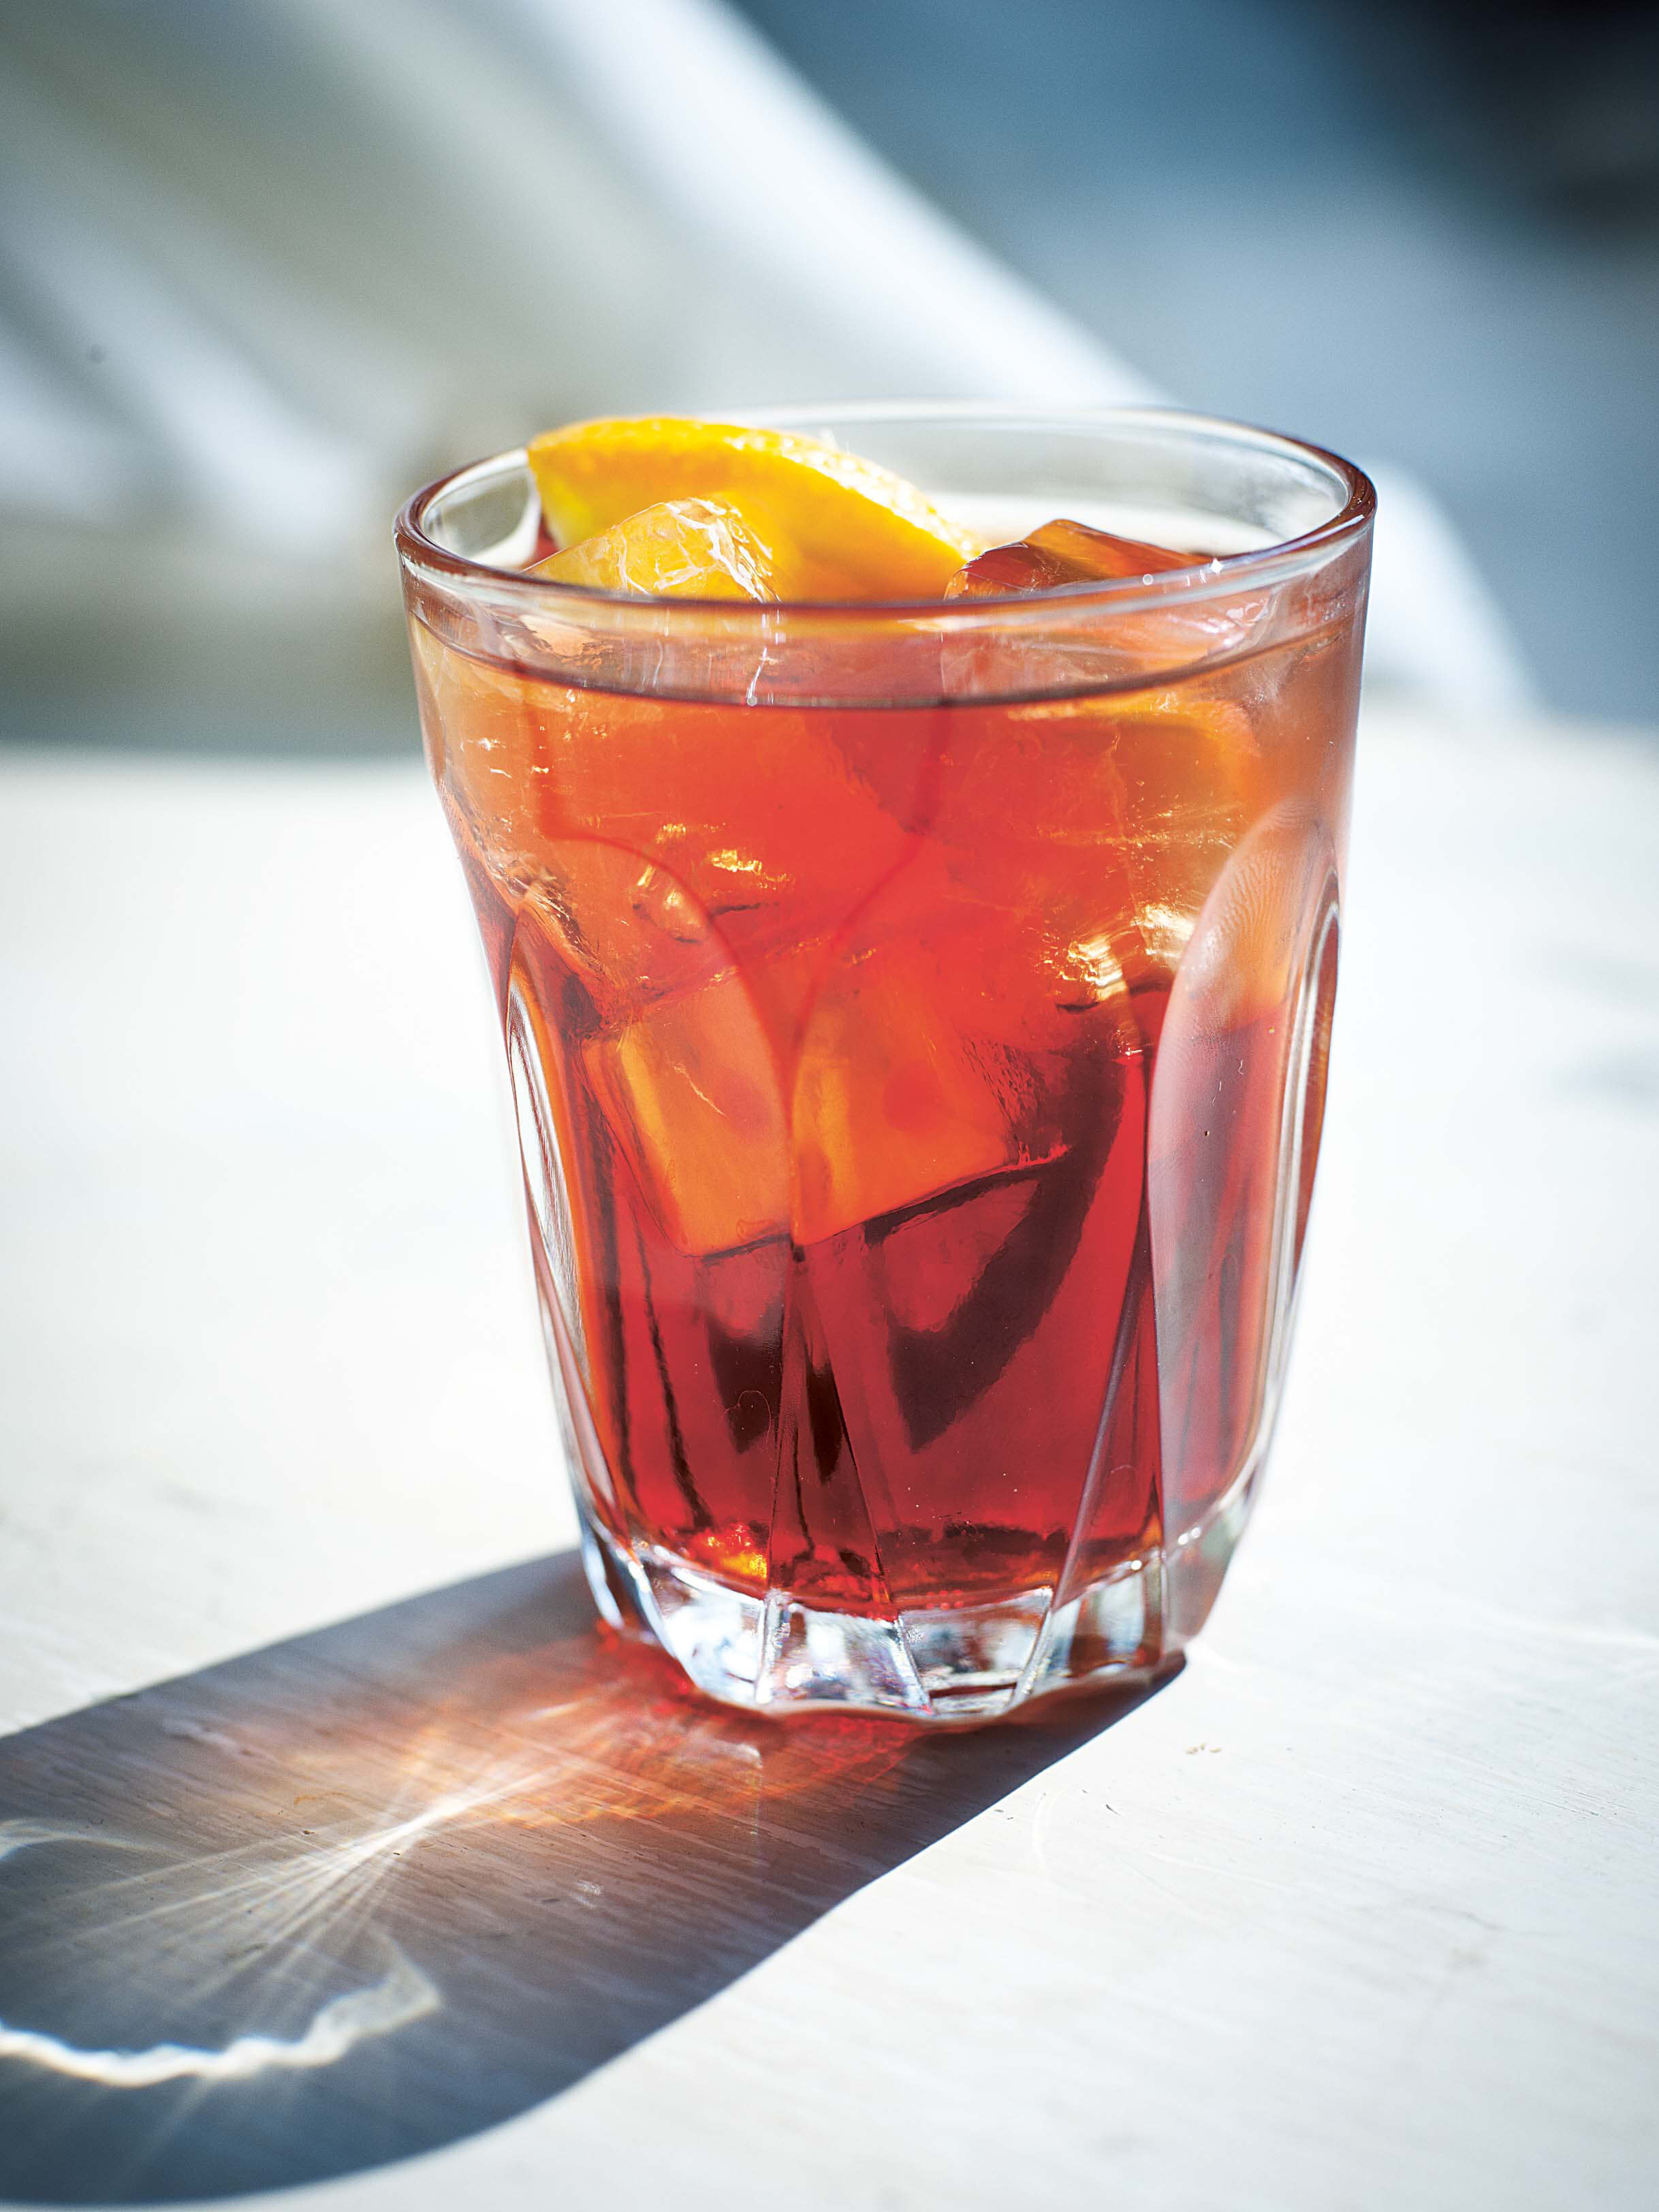 Top 10: Best Negronis in London This May, best negronis in London,, best bars in London, negroni, negronis in London, best cocktail bars london, best cocktail bars in london, best cocktail bar london, best cocktails in london, best cocktail bar in london, best cocktails london, best london cocktail bars, london best cocktail bars, best cocktails bars in london, the best cocktail bar in london, the best cocktail bars in london, best cocktail bar, best cocktail in london, best cocktail london, cocktail bar london best, best cocktails bars london, best cocktails bar london, the best cocktails in london, best london cocktails, london best cocktail bar…